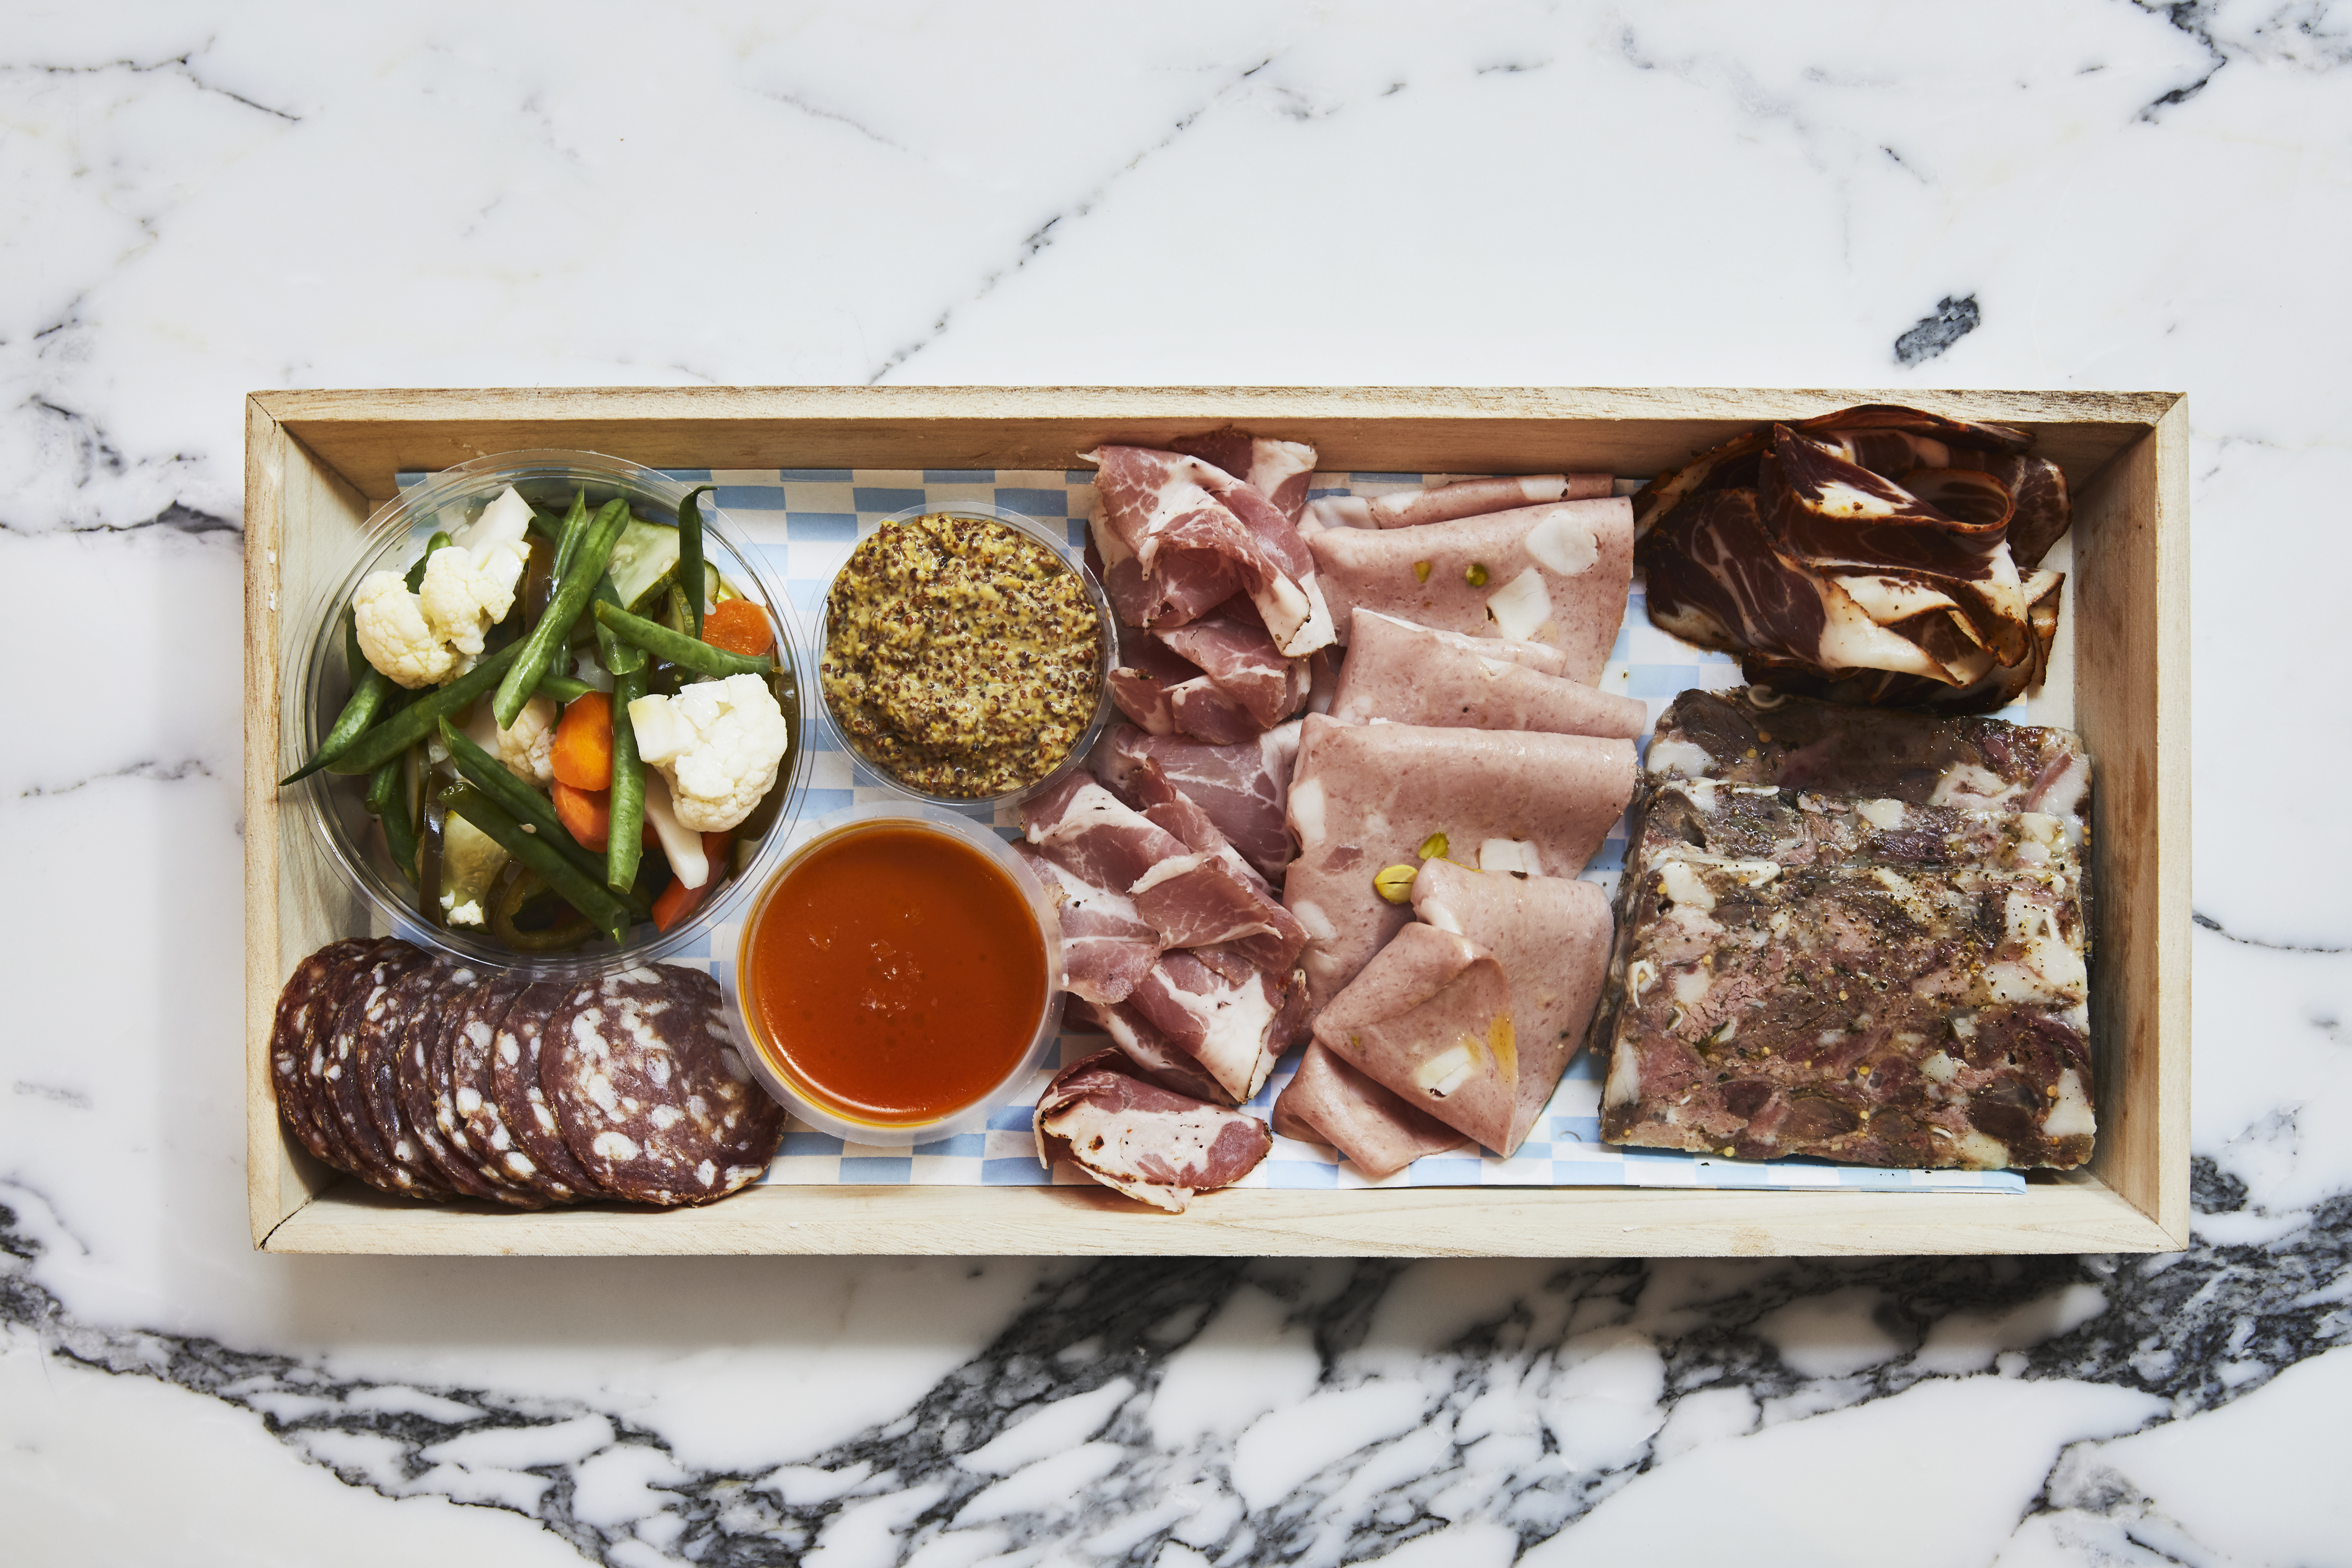 A wooden box on a marble counter filled with pickled veggies and cured meats